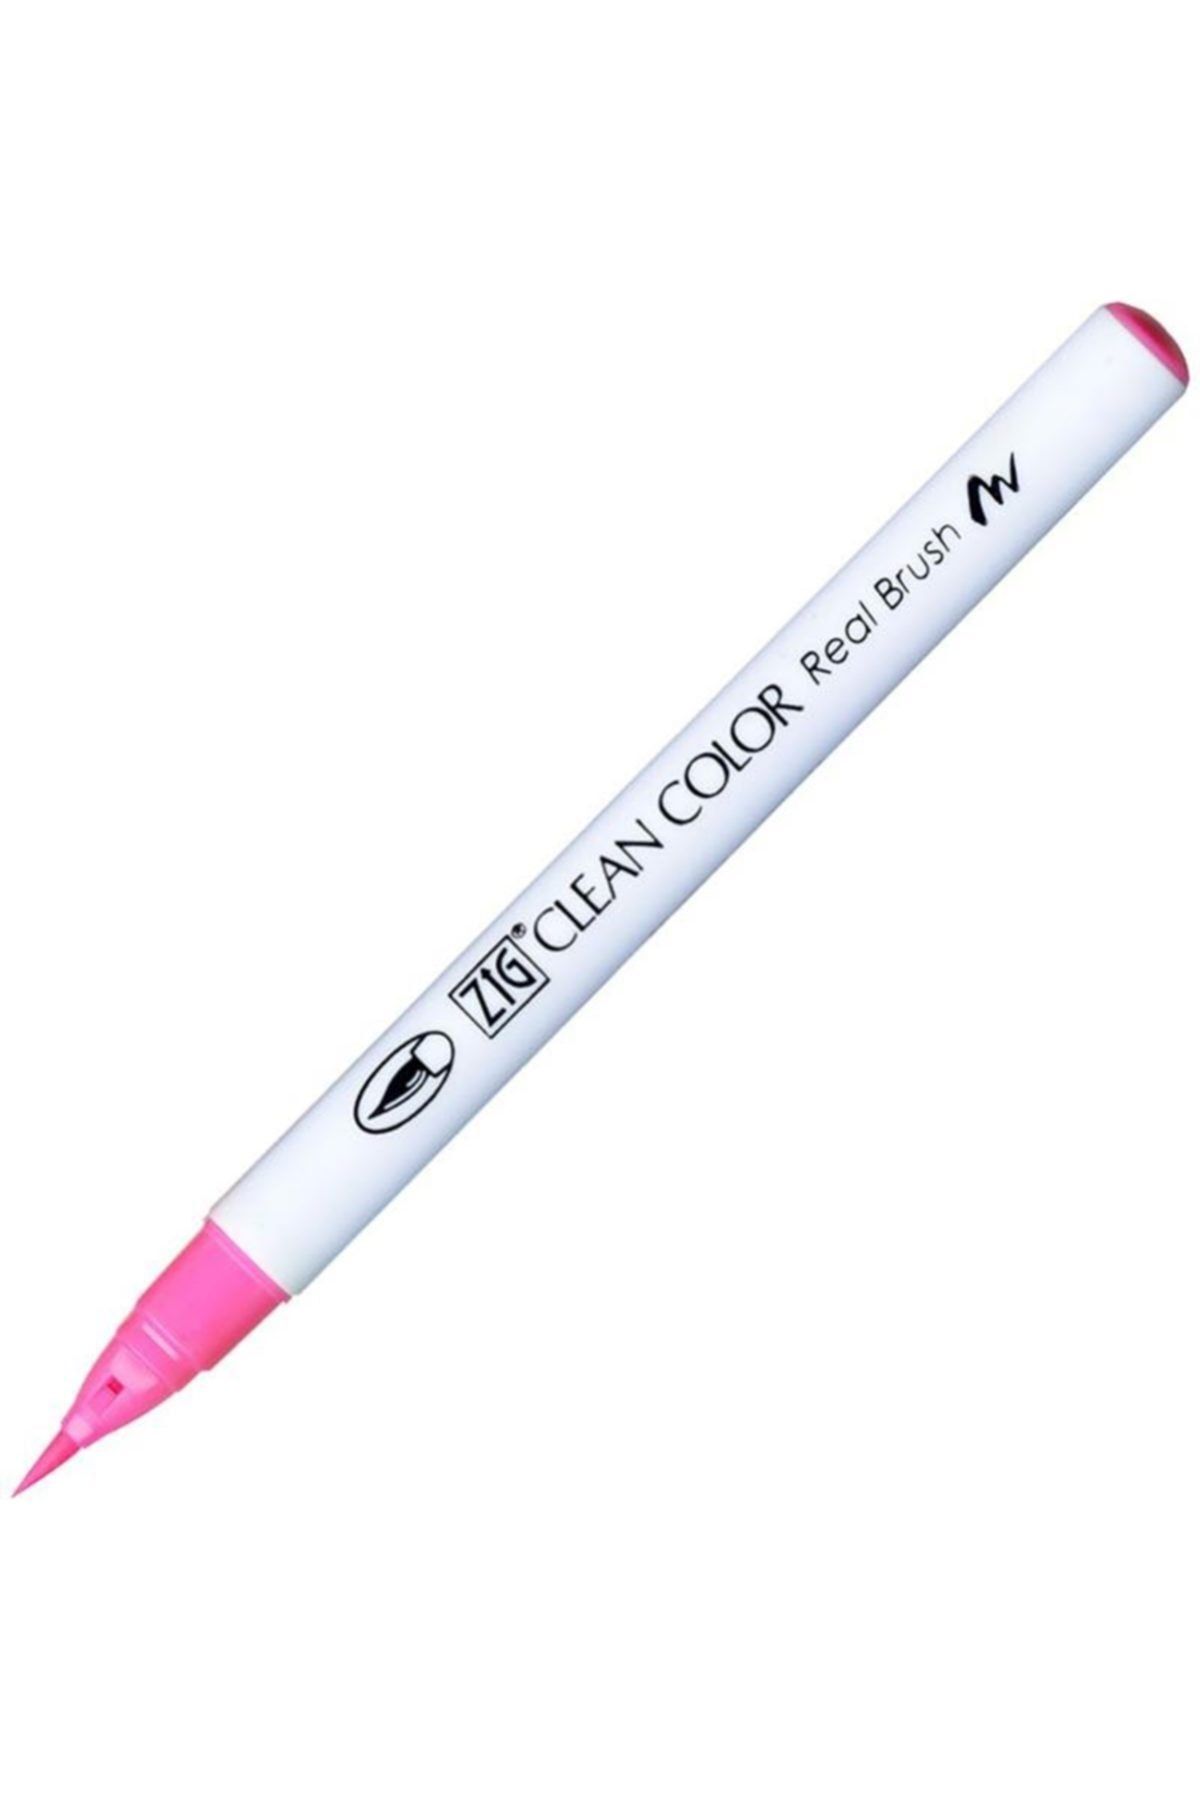 Zig Rb-6000at Clean Color Real Brush Pen Flourescent Pink 003